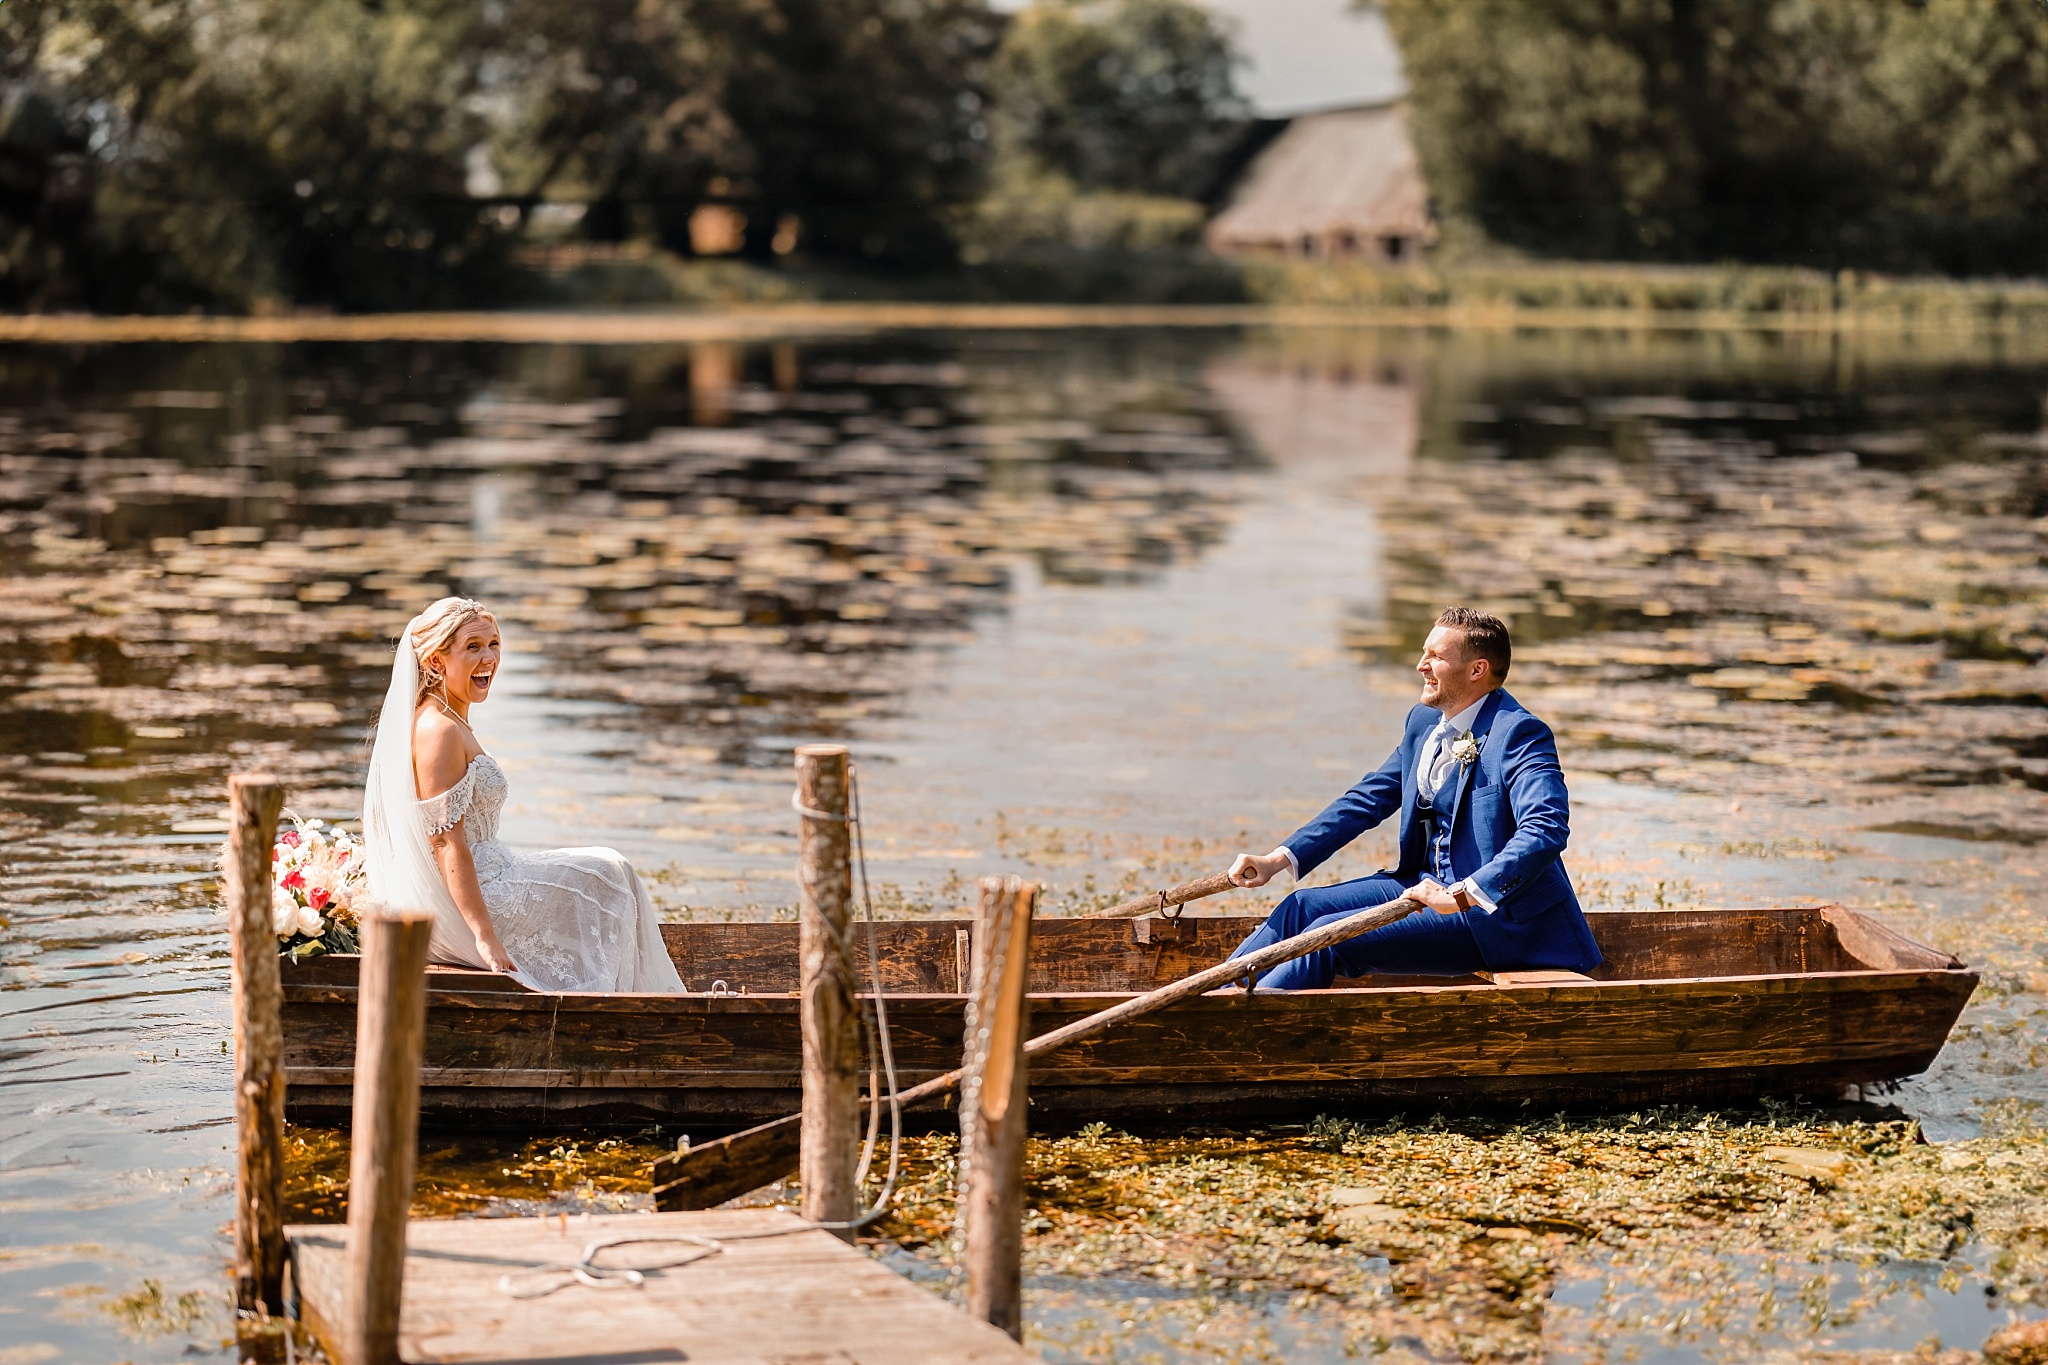 bride and groom rowing on a lake during their wedding photography session in Spain, near Marbella